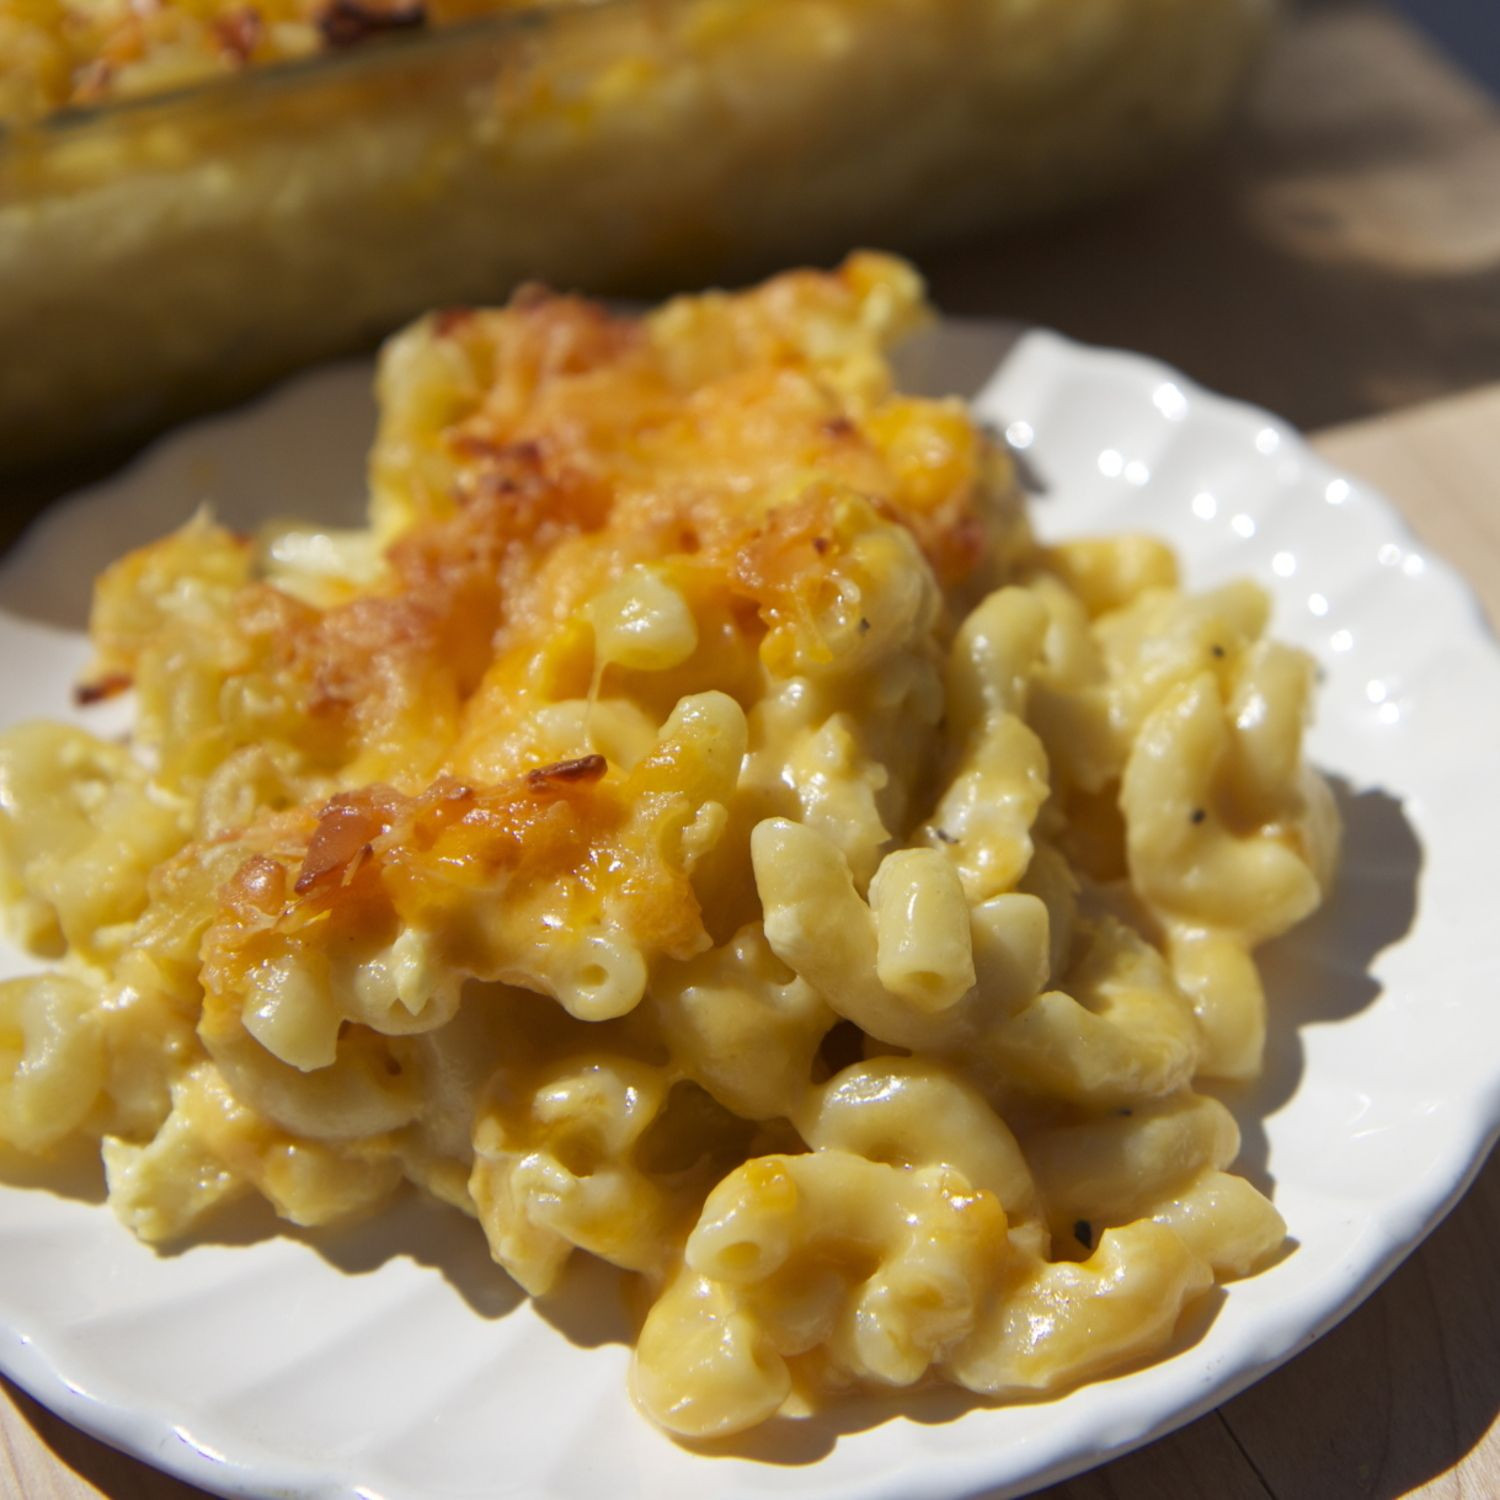 Weight Watchers Baked Macaroni And Cheese
 Baked Macaroni & Cheese Weight Watchers Recipe